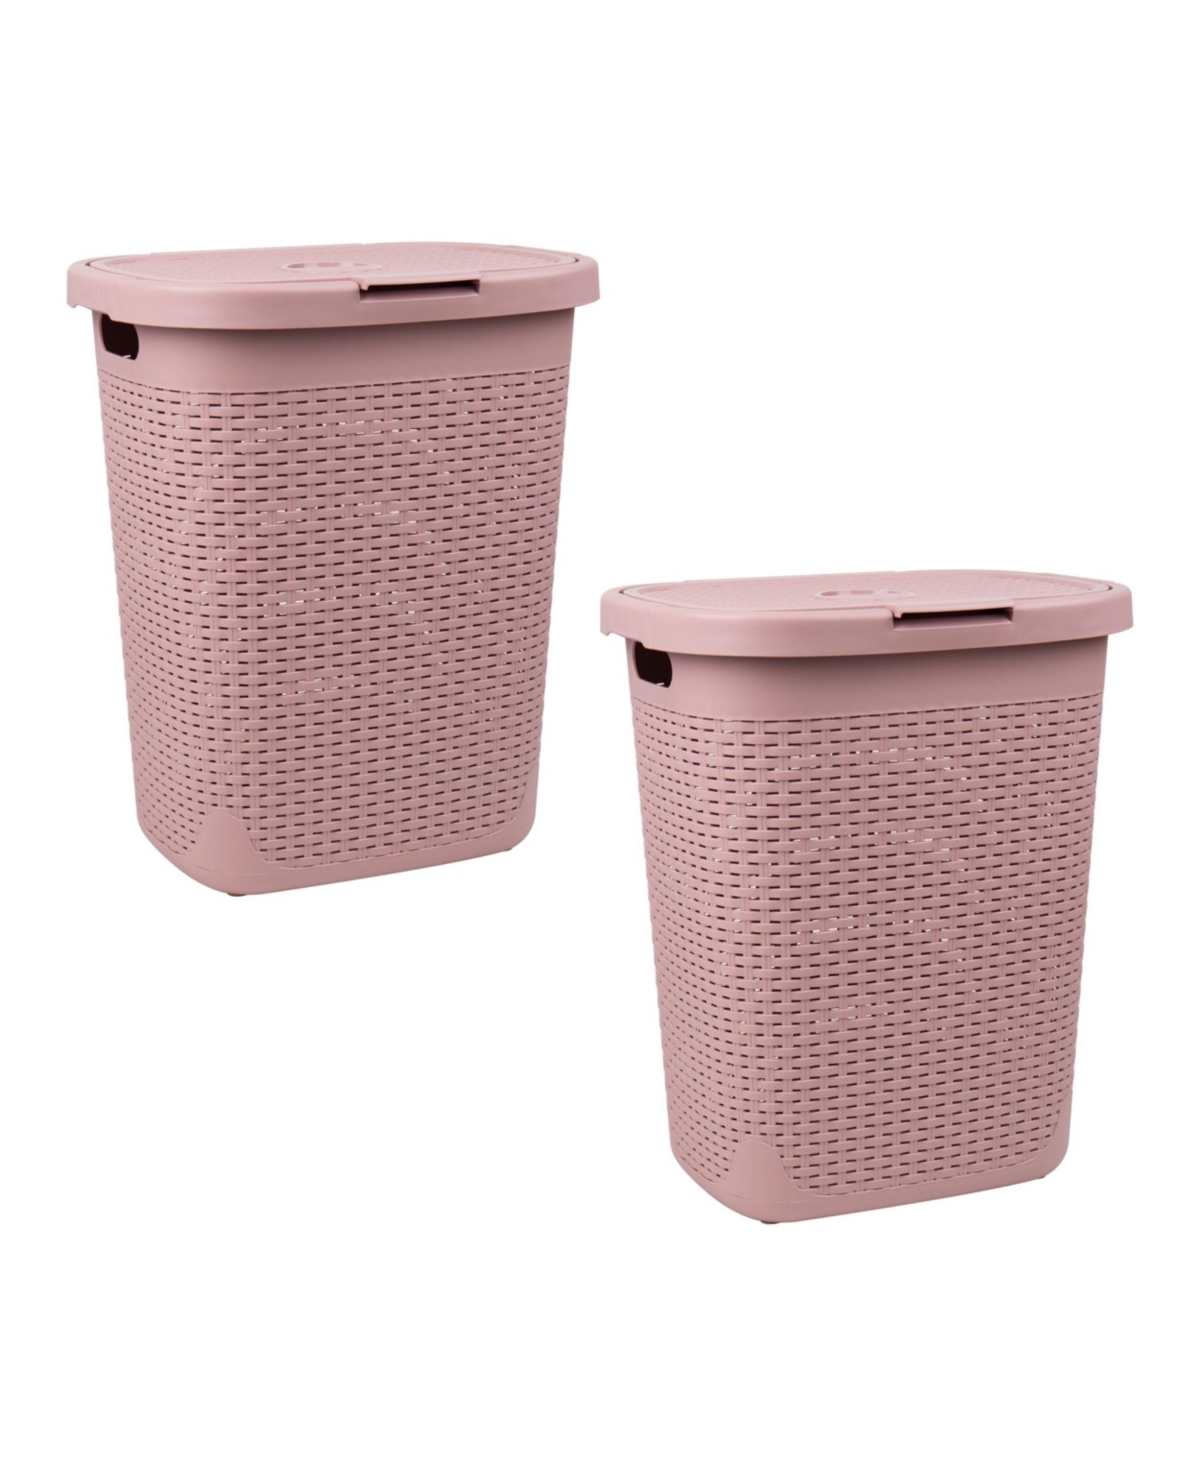 Basket Collection Slim Laundry Hamper, Cut Out Handles, Attached Hinged Lid, Ventilated, Set of 2 - Pink